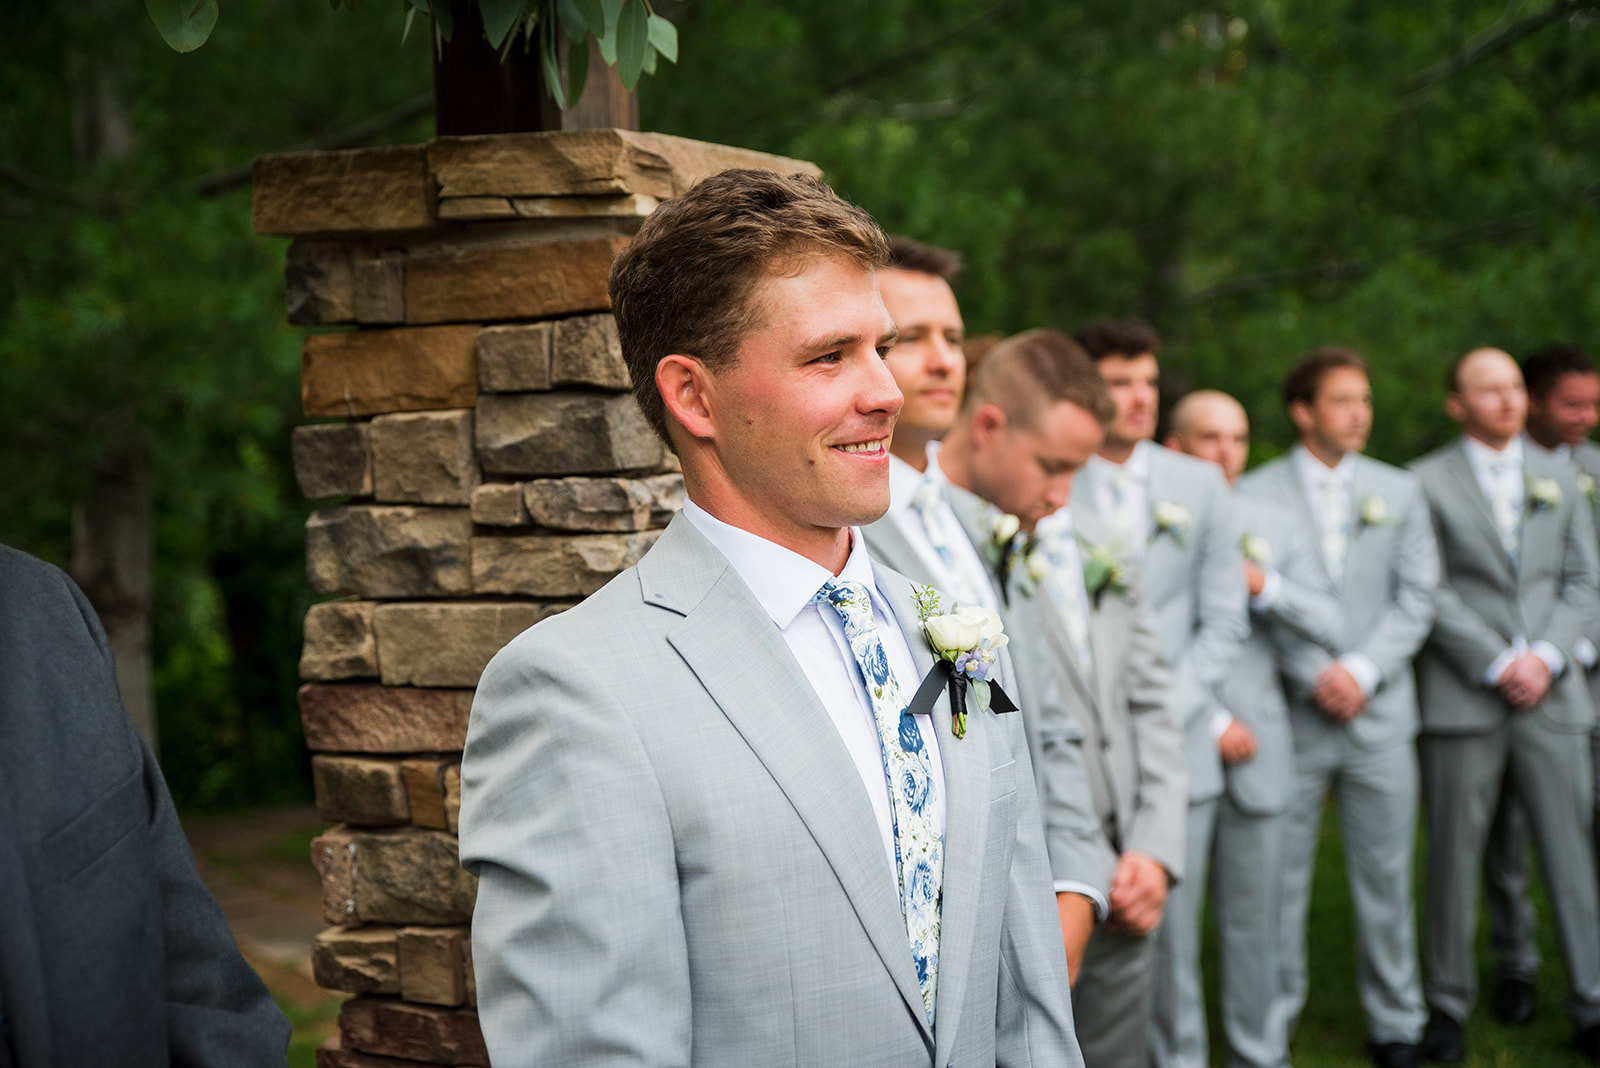 Groom smiles as he waits for bride to walk down the aisle.